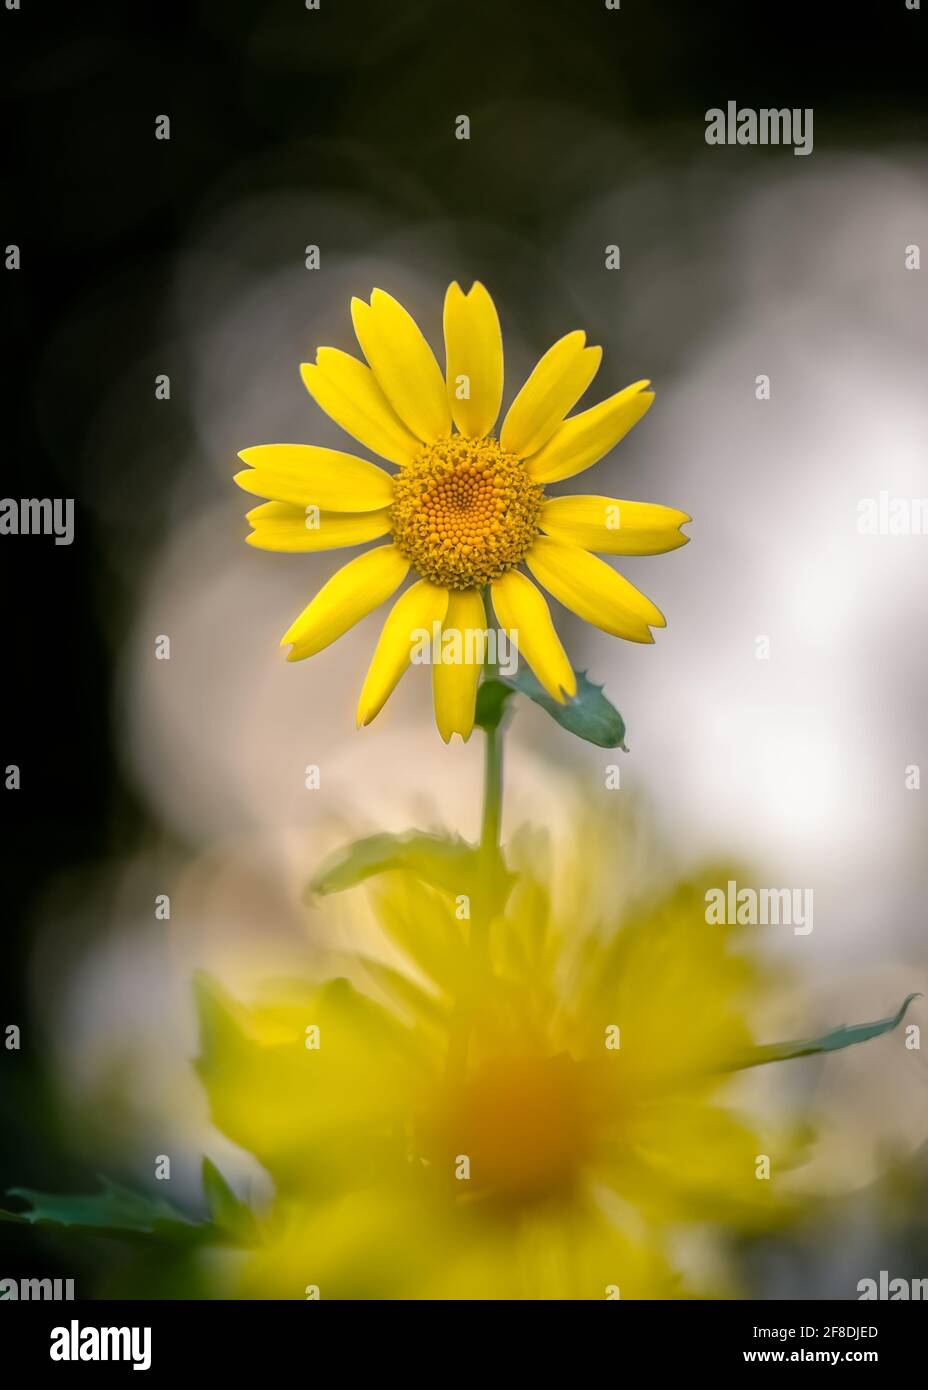 Artistic closeup of yellow corn marigold flower with blurred yellow flower in foreground, against an attractive blurred background. Stock Photo